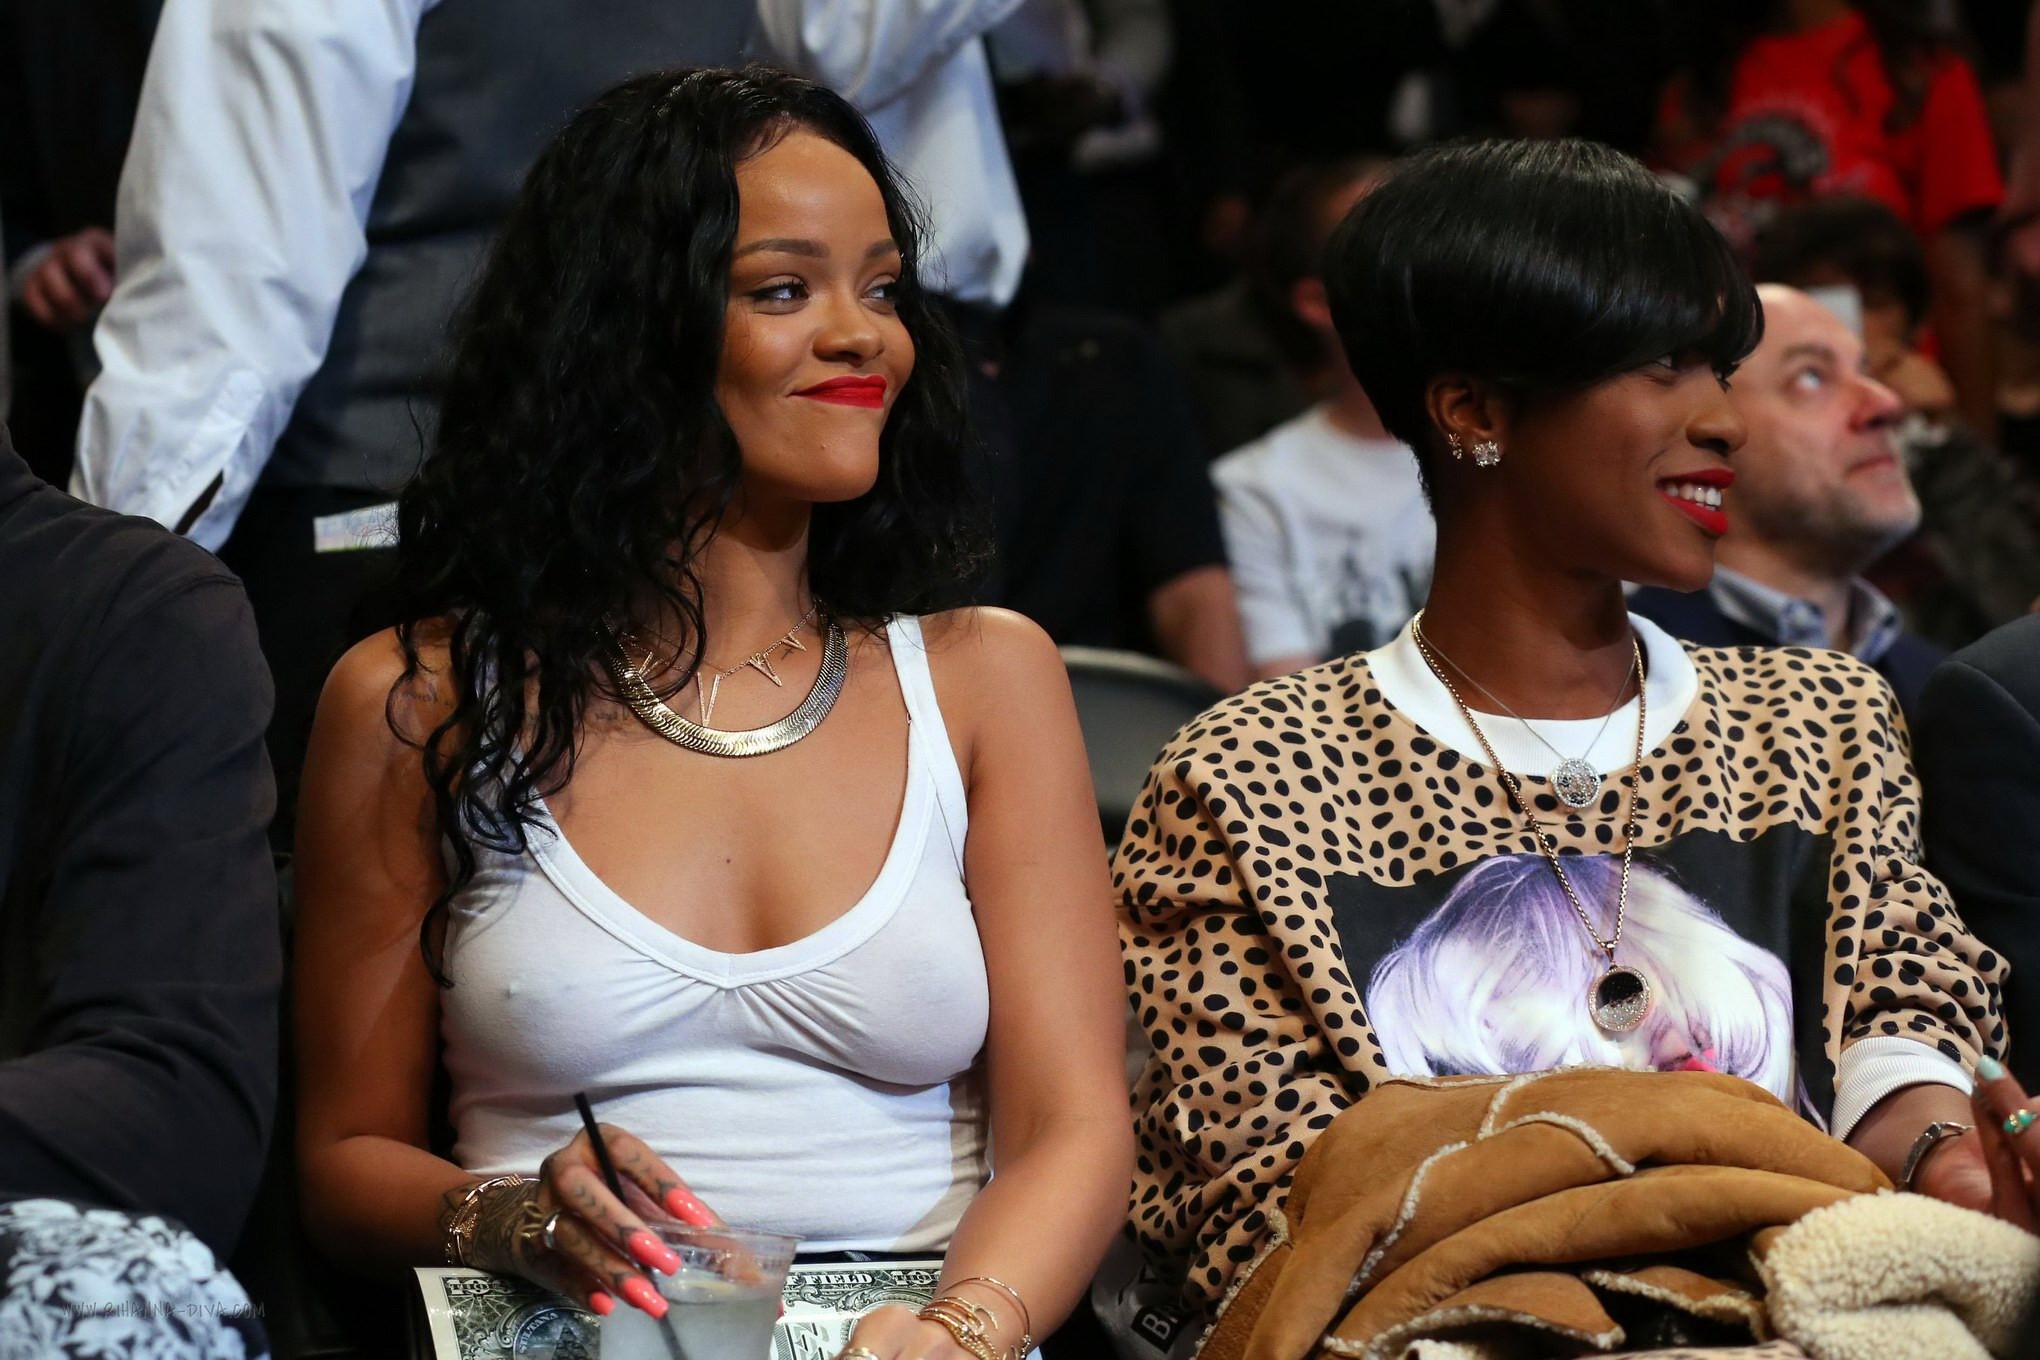 Rihanna shows off her boobs in seethru top at a basketball game in NYC #75197962